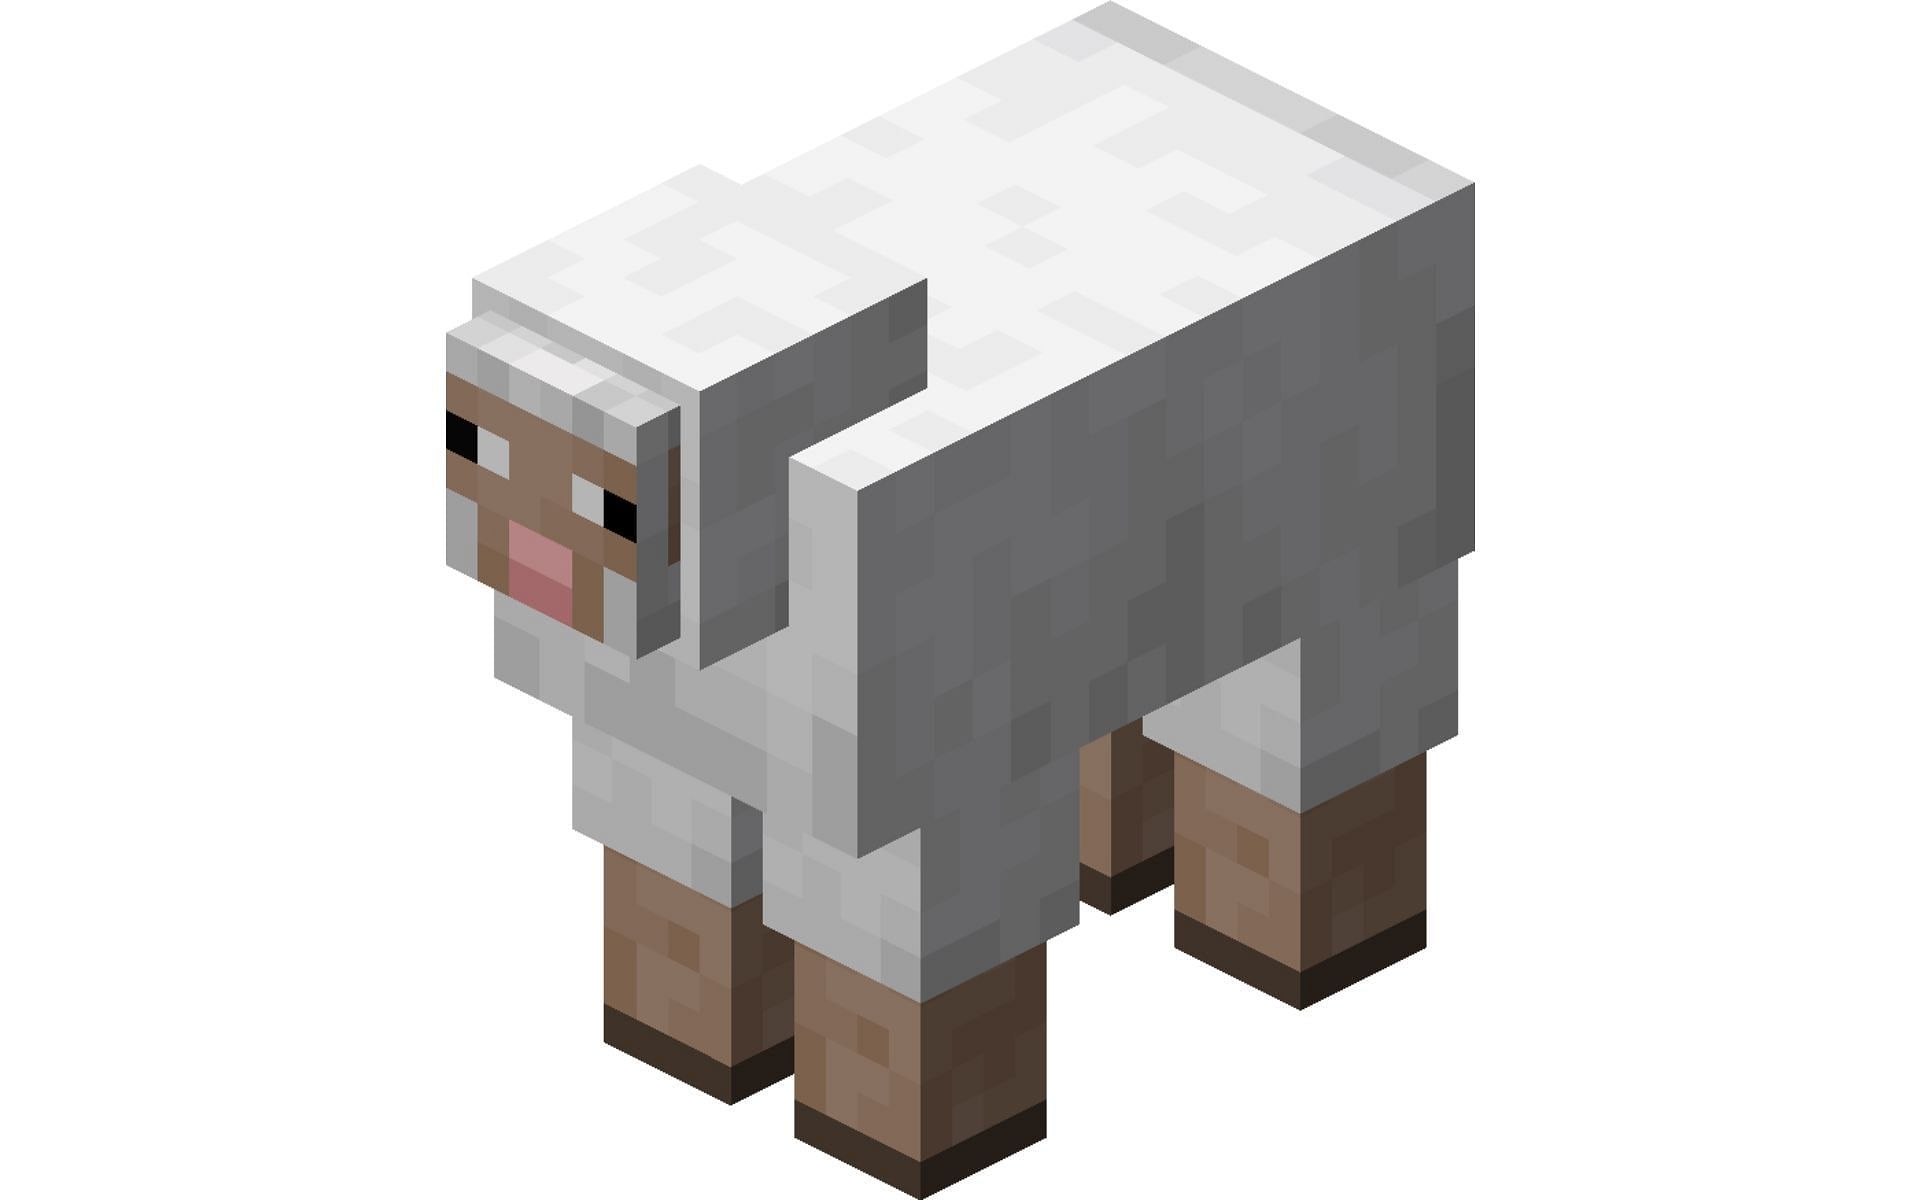 In-game model of the Sheep (Image via Fandom)